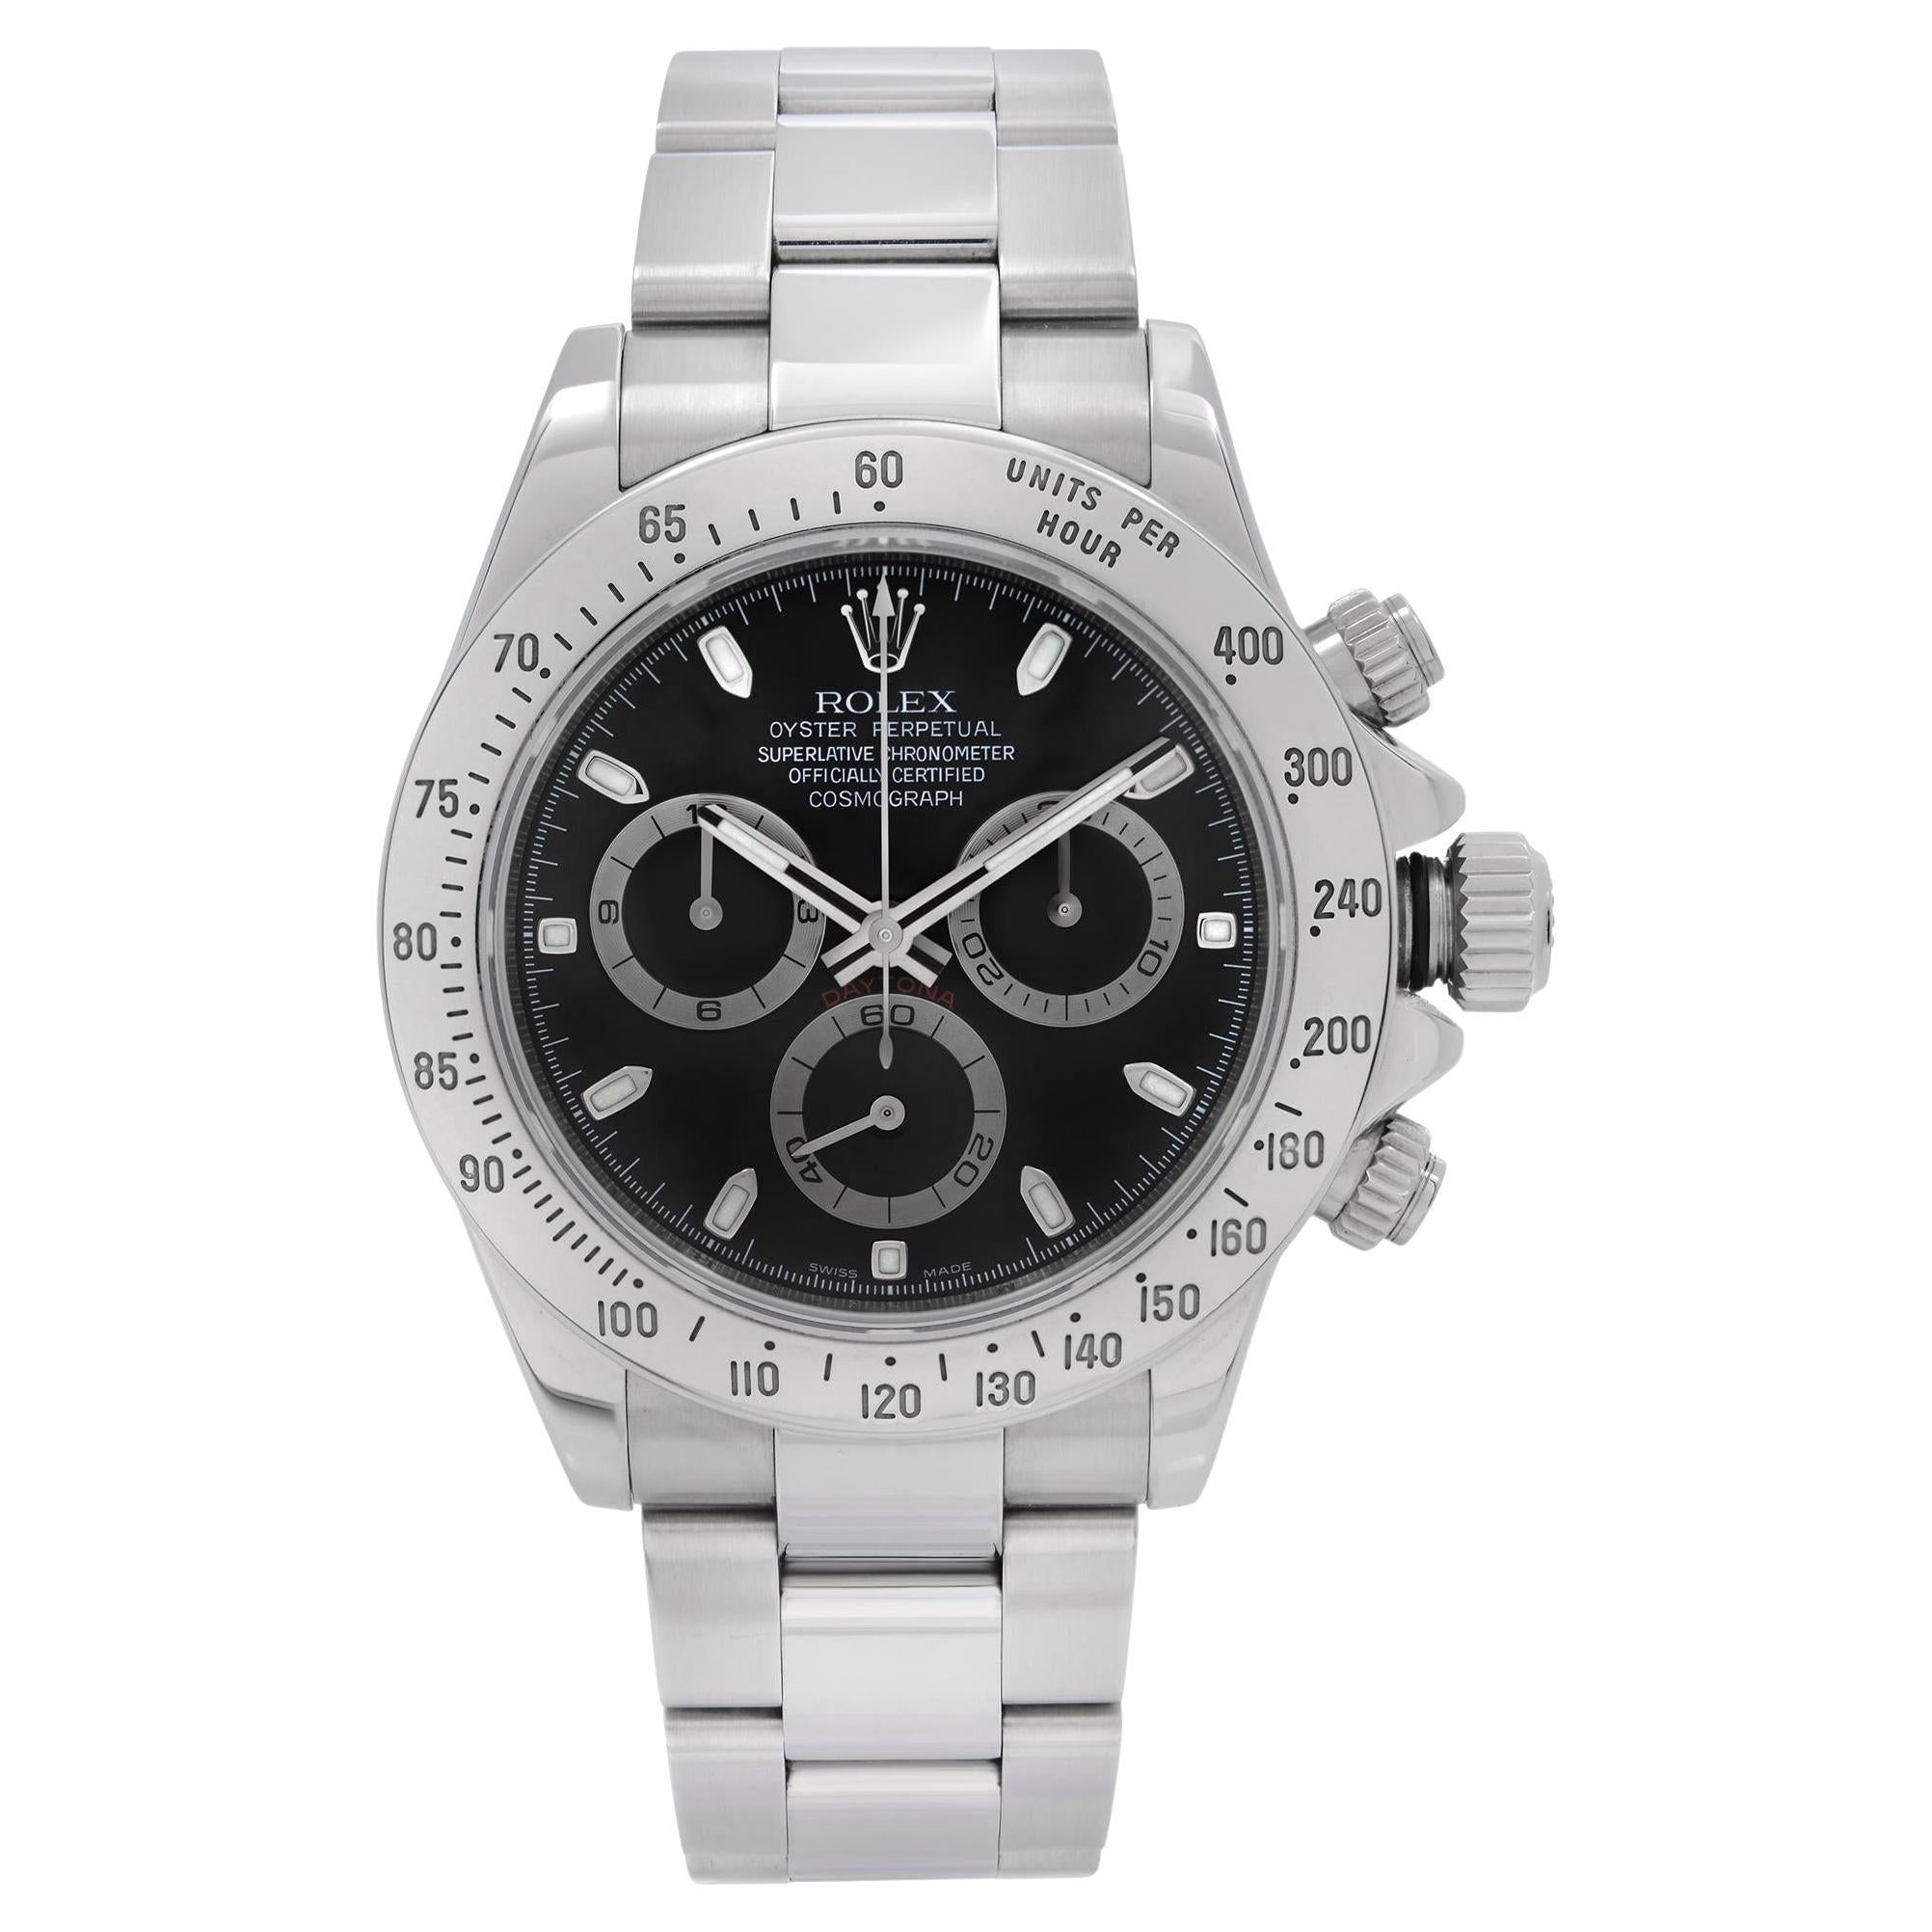 Rolex Cosmograph Daytona Steel Black Index Dial Automatic Mens Watch 116520